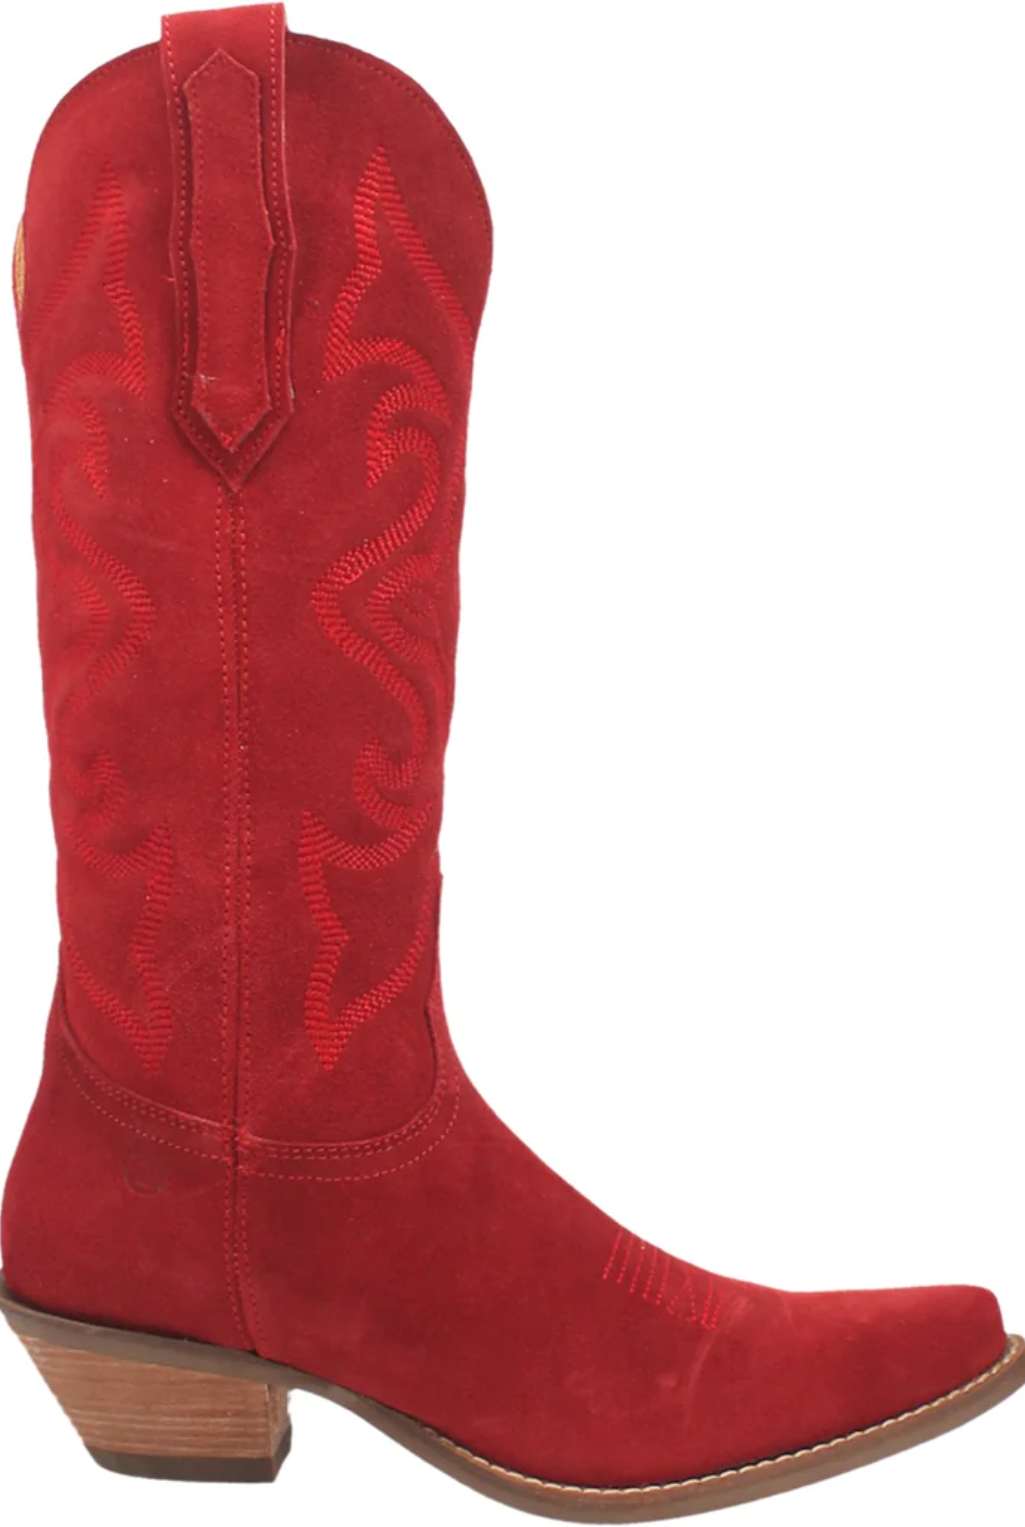 Out West Boot - Red